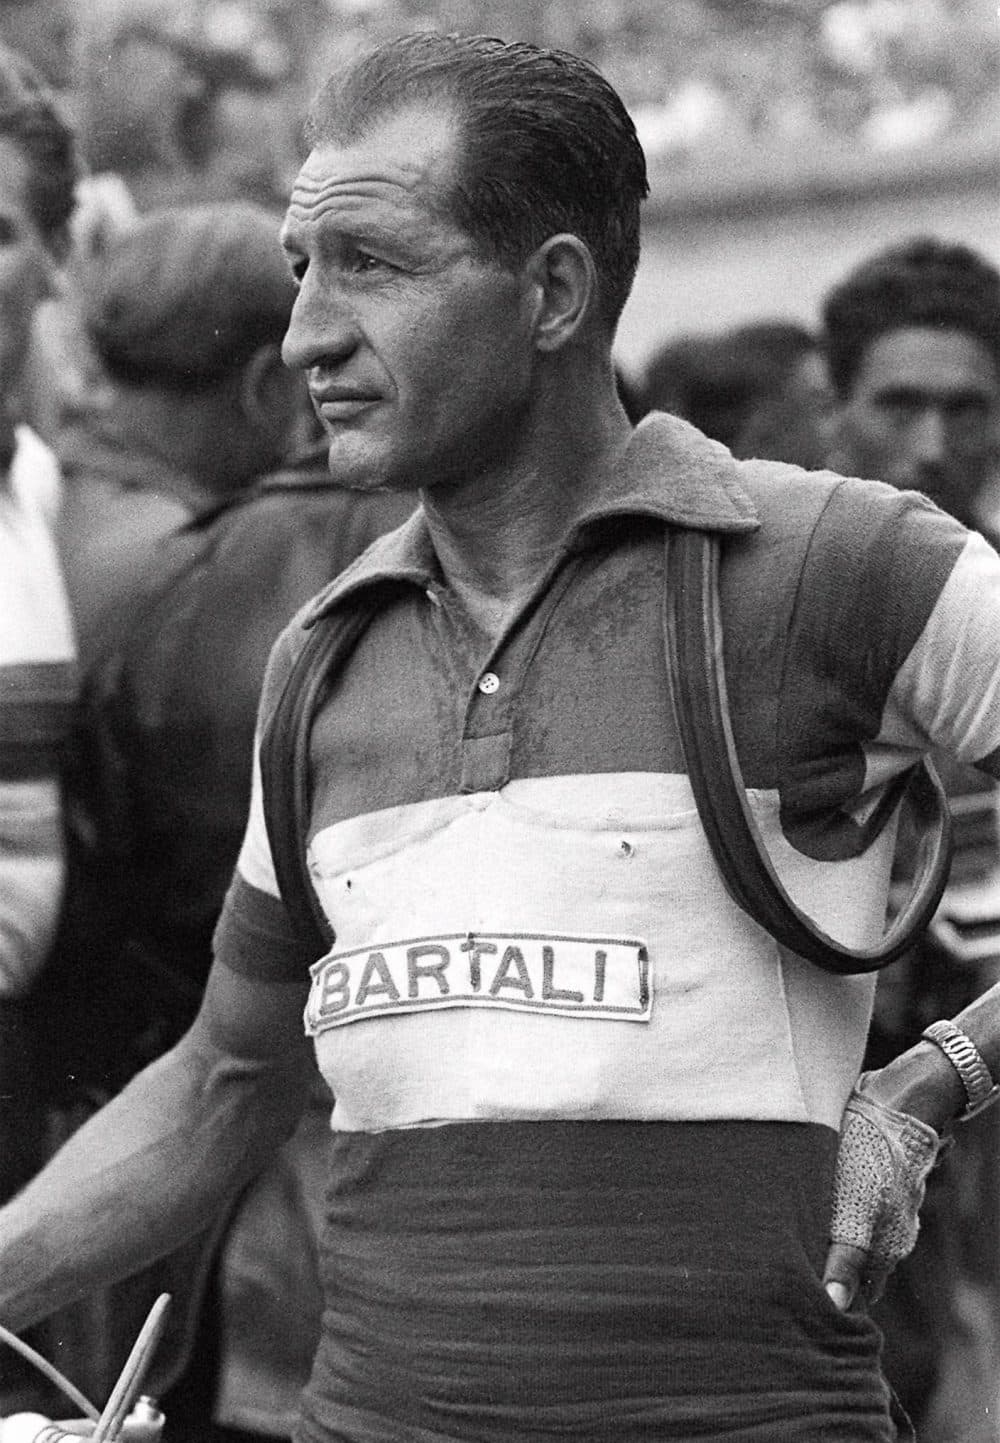 Italian cycling great Gino Bartali, seen in this 1953 picture, whose victory in the 1948 Tour of France may have averted a political insurrection at home. In 1948, the nationwide enthusiasm touched off by Bartali's victory in the prestigious French Tour helped to ease political tensions over the shooting and wounding of Communist leader Palmiro Togliatti. Several historians suggested thatelation over Bartali's win avoided an insurrection by Italian communists. (AP Photo)